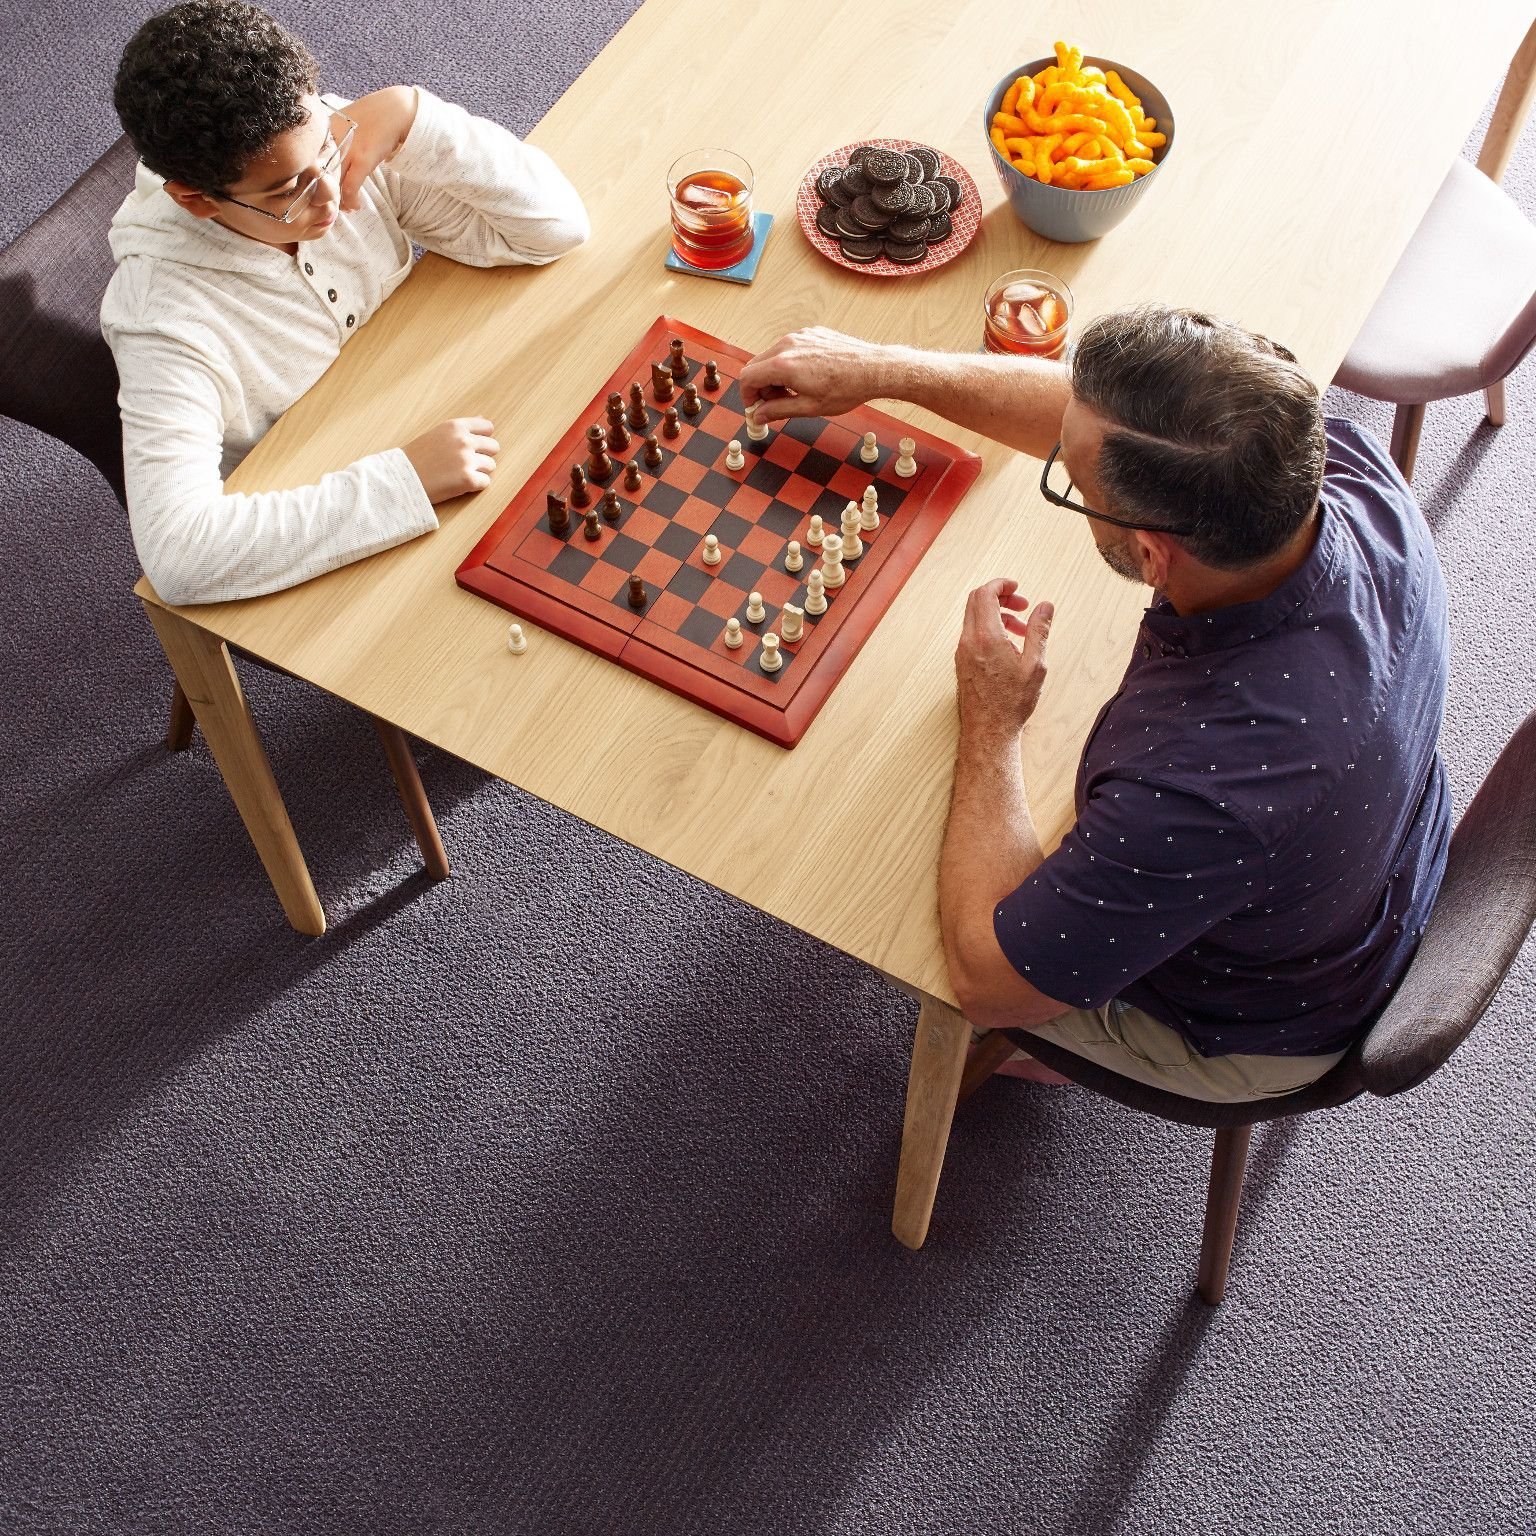 Father and son playing chess in a room with gray carpet floor from Direct Sales Floors in Danville, CA